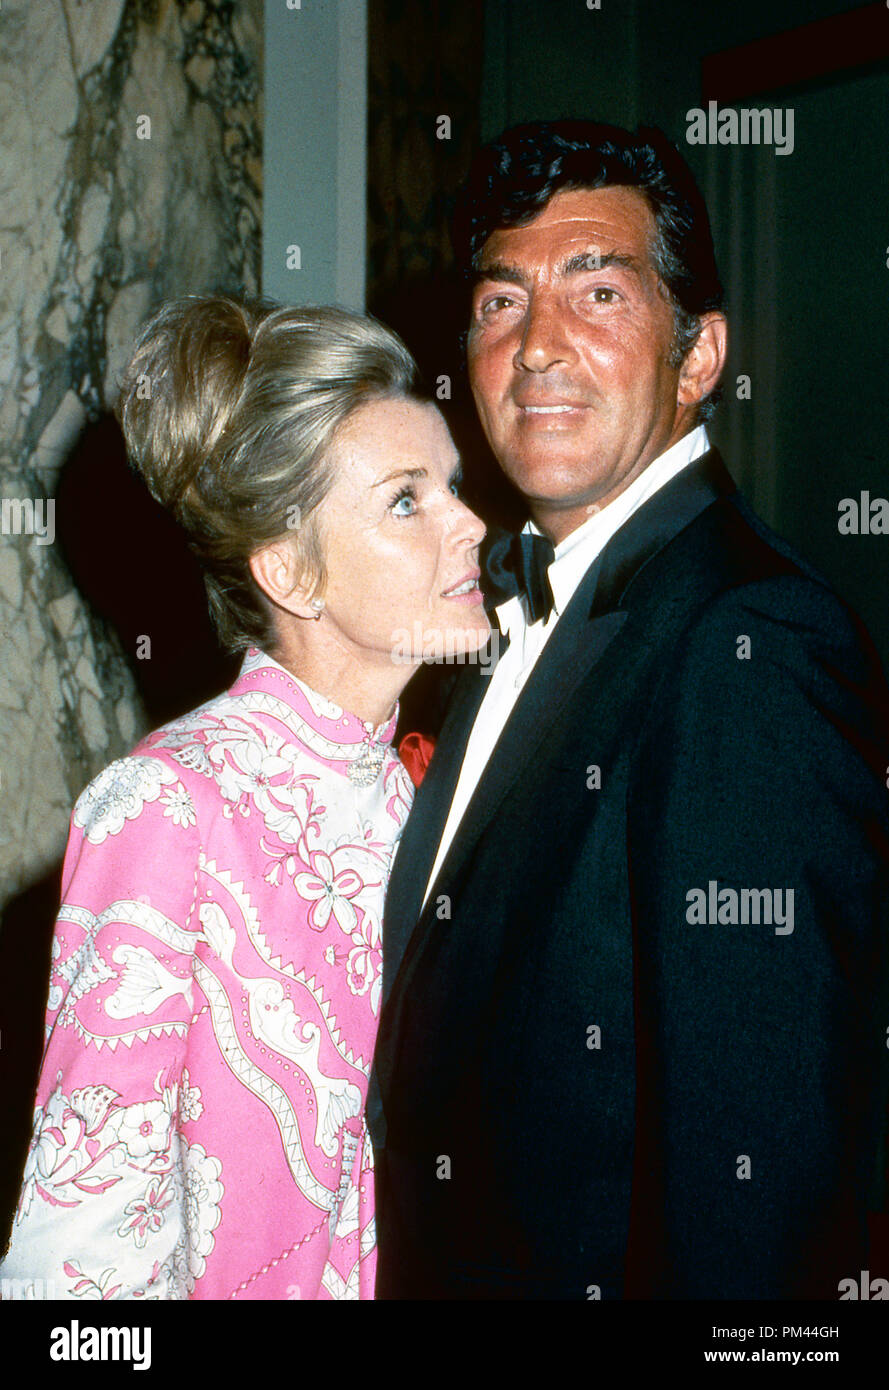 Dean Martin and wife Jeanne Martin, circa 1967. File Reference #1023 007THA  © JRC /The Hollywood Archive - All Rights Reserved Stock Photo - Alamy